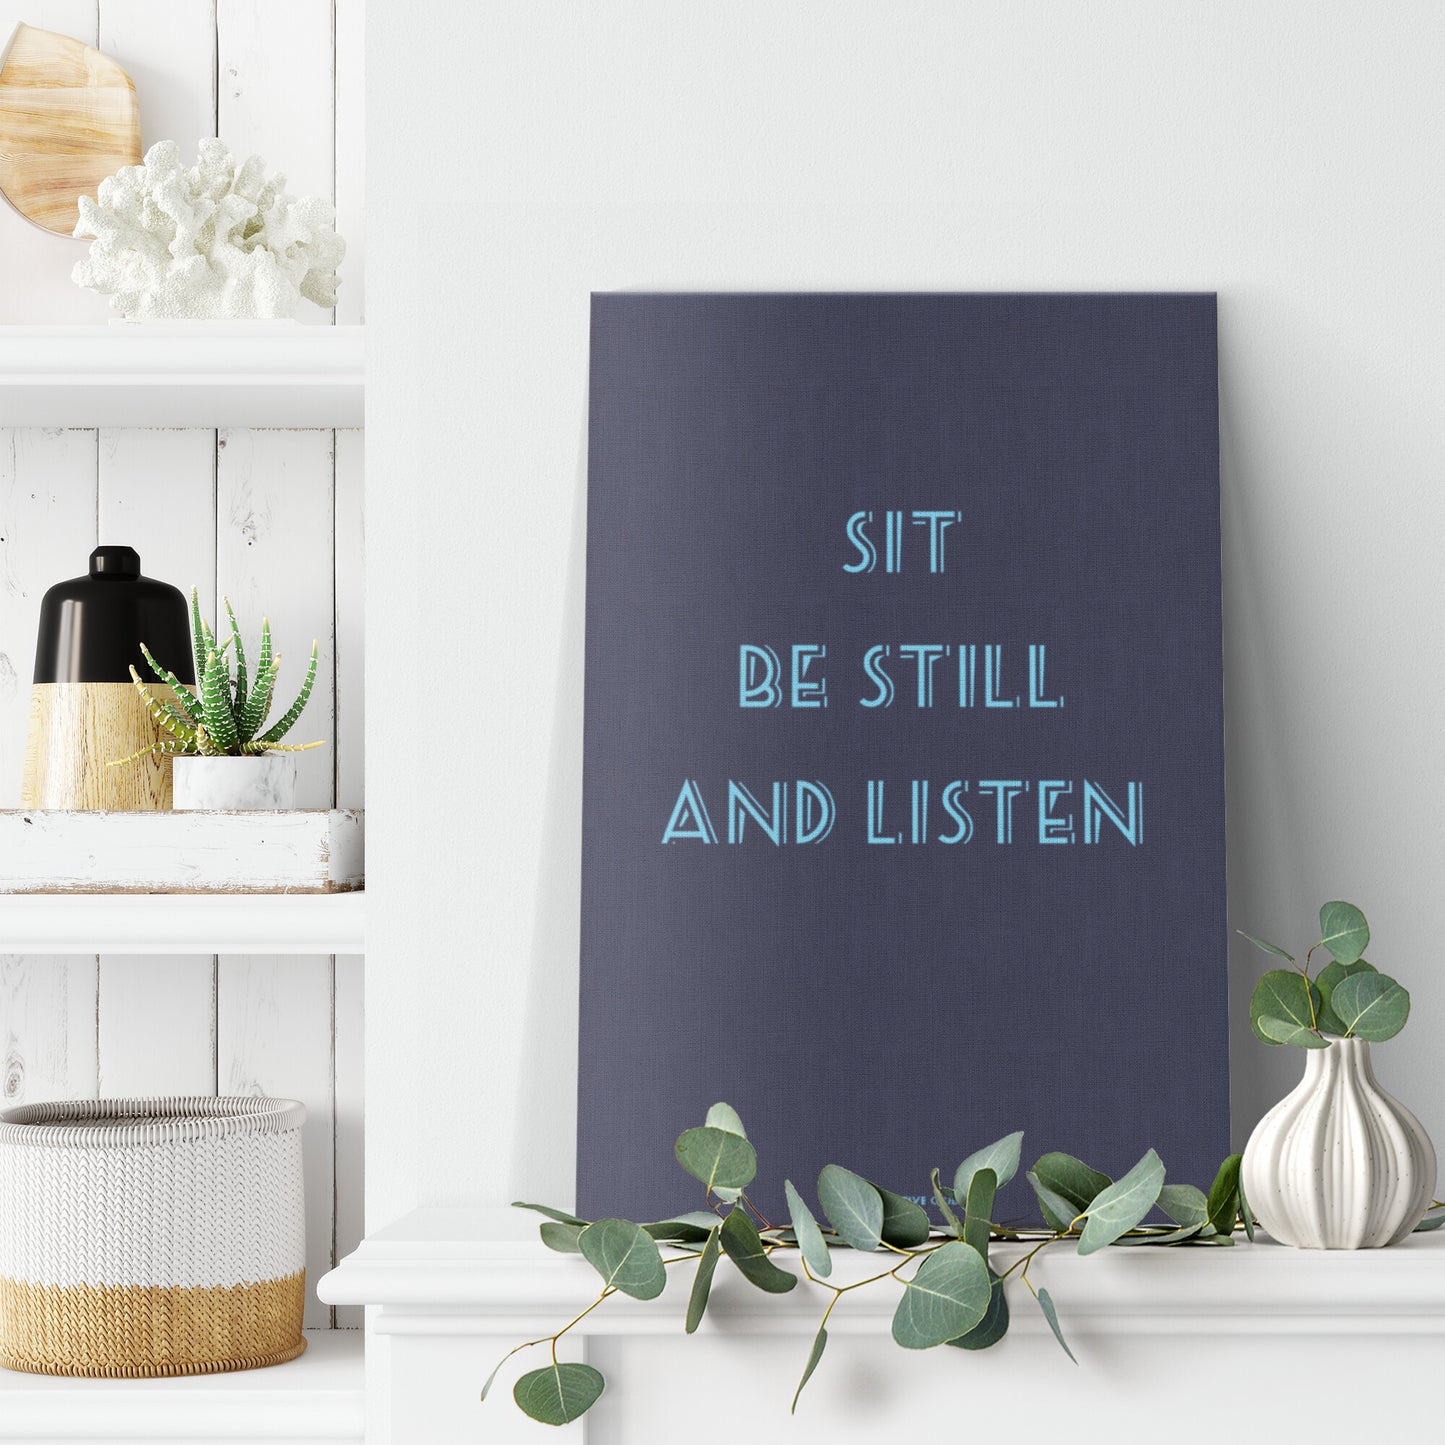 SIT BE STILL AND LISTEN